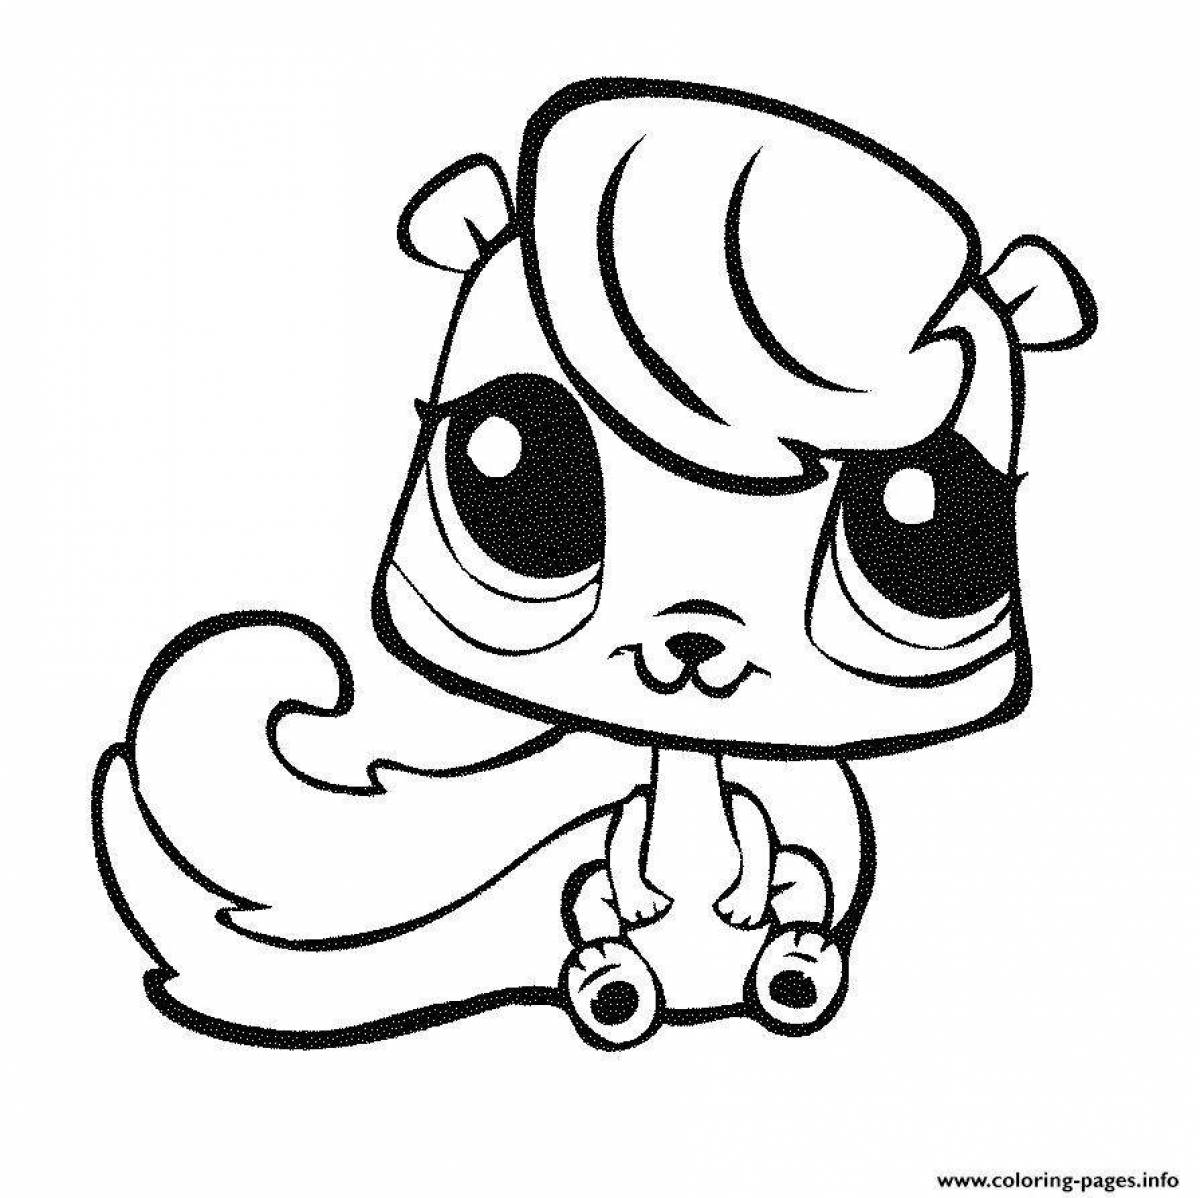 Lps bright coloring page